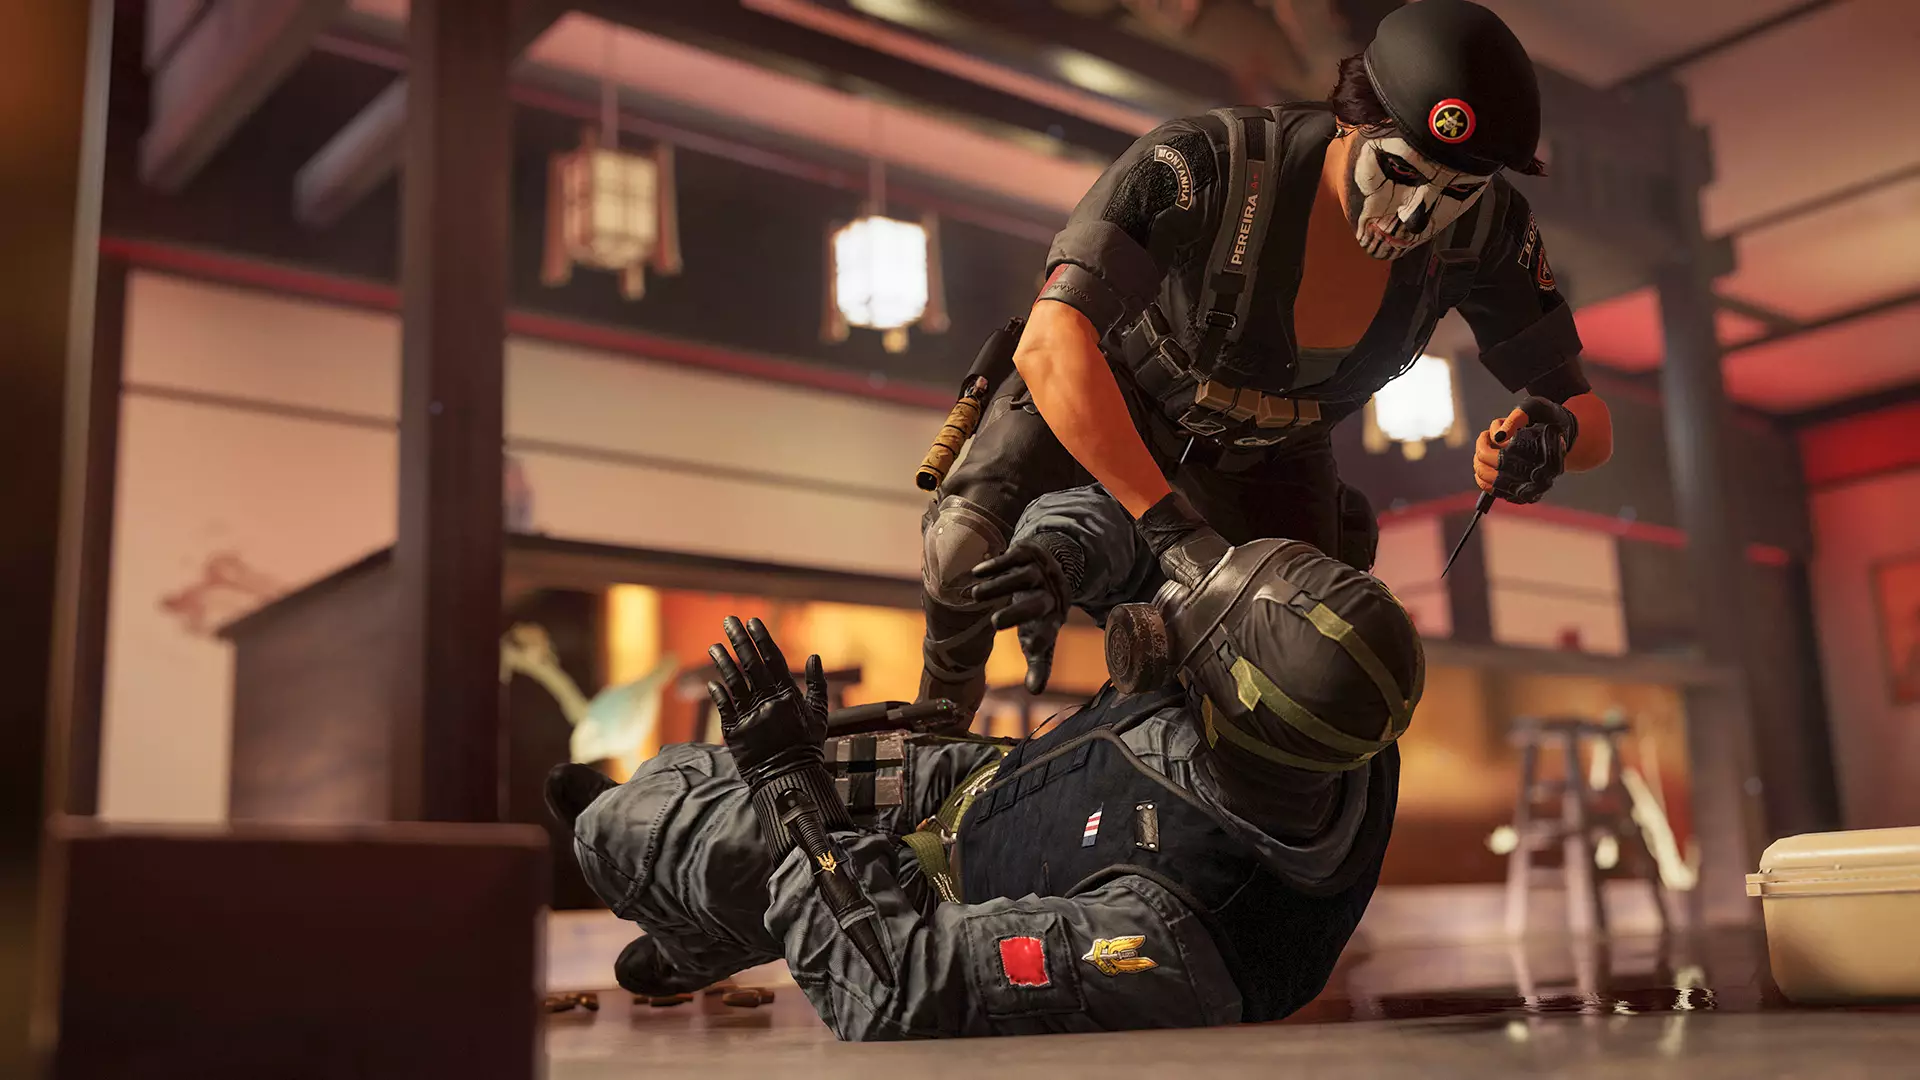 Play 'Rainbow Six Siege' For Free This Weekend Ahead Of The New Season Launch